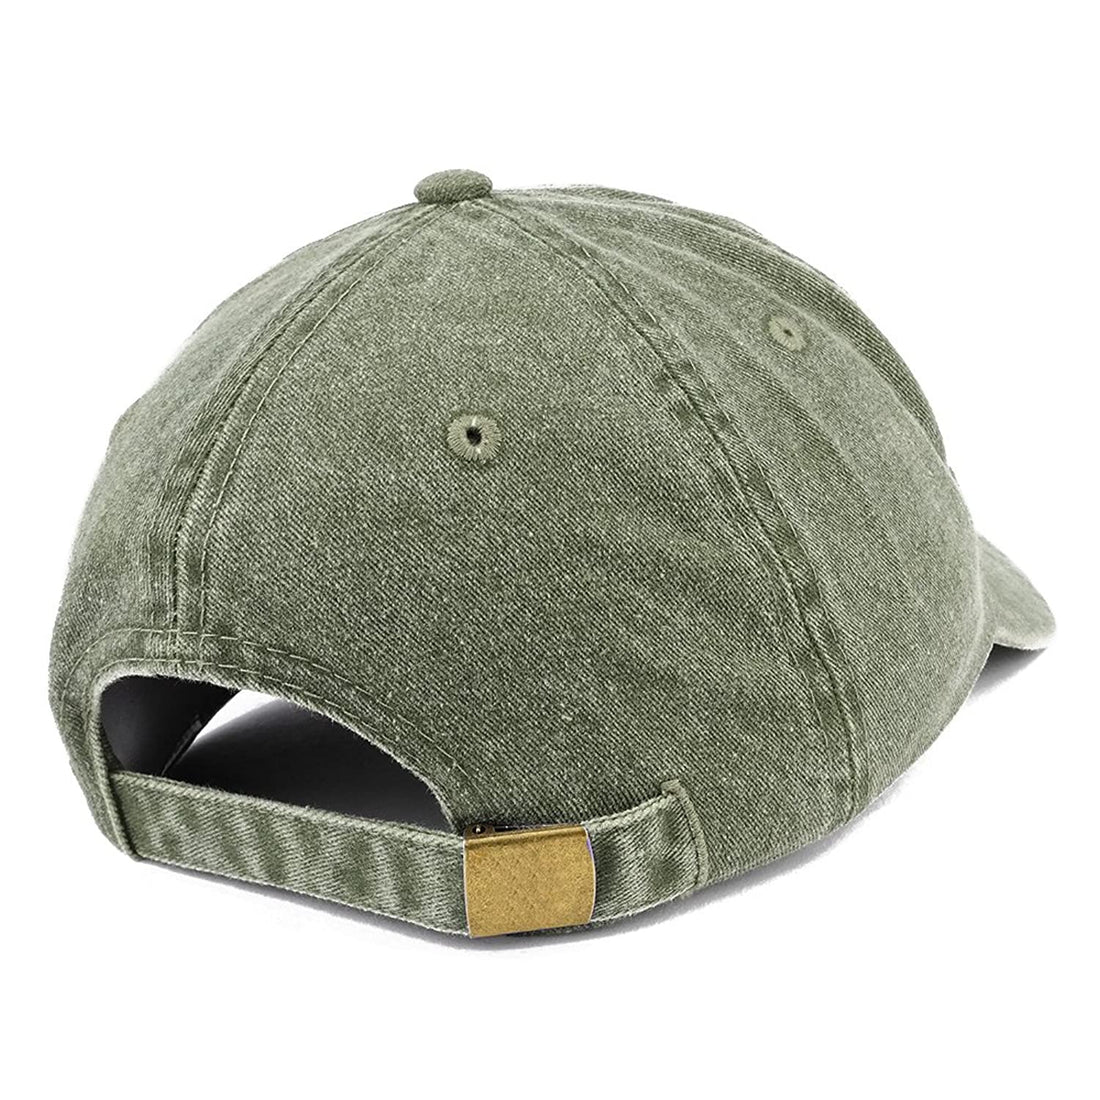 Trendy Apparel Shop Established 1976 Embroidered 42nd Birthday Gift Pigment Dyed Washed Cotton Cap - Olive